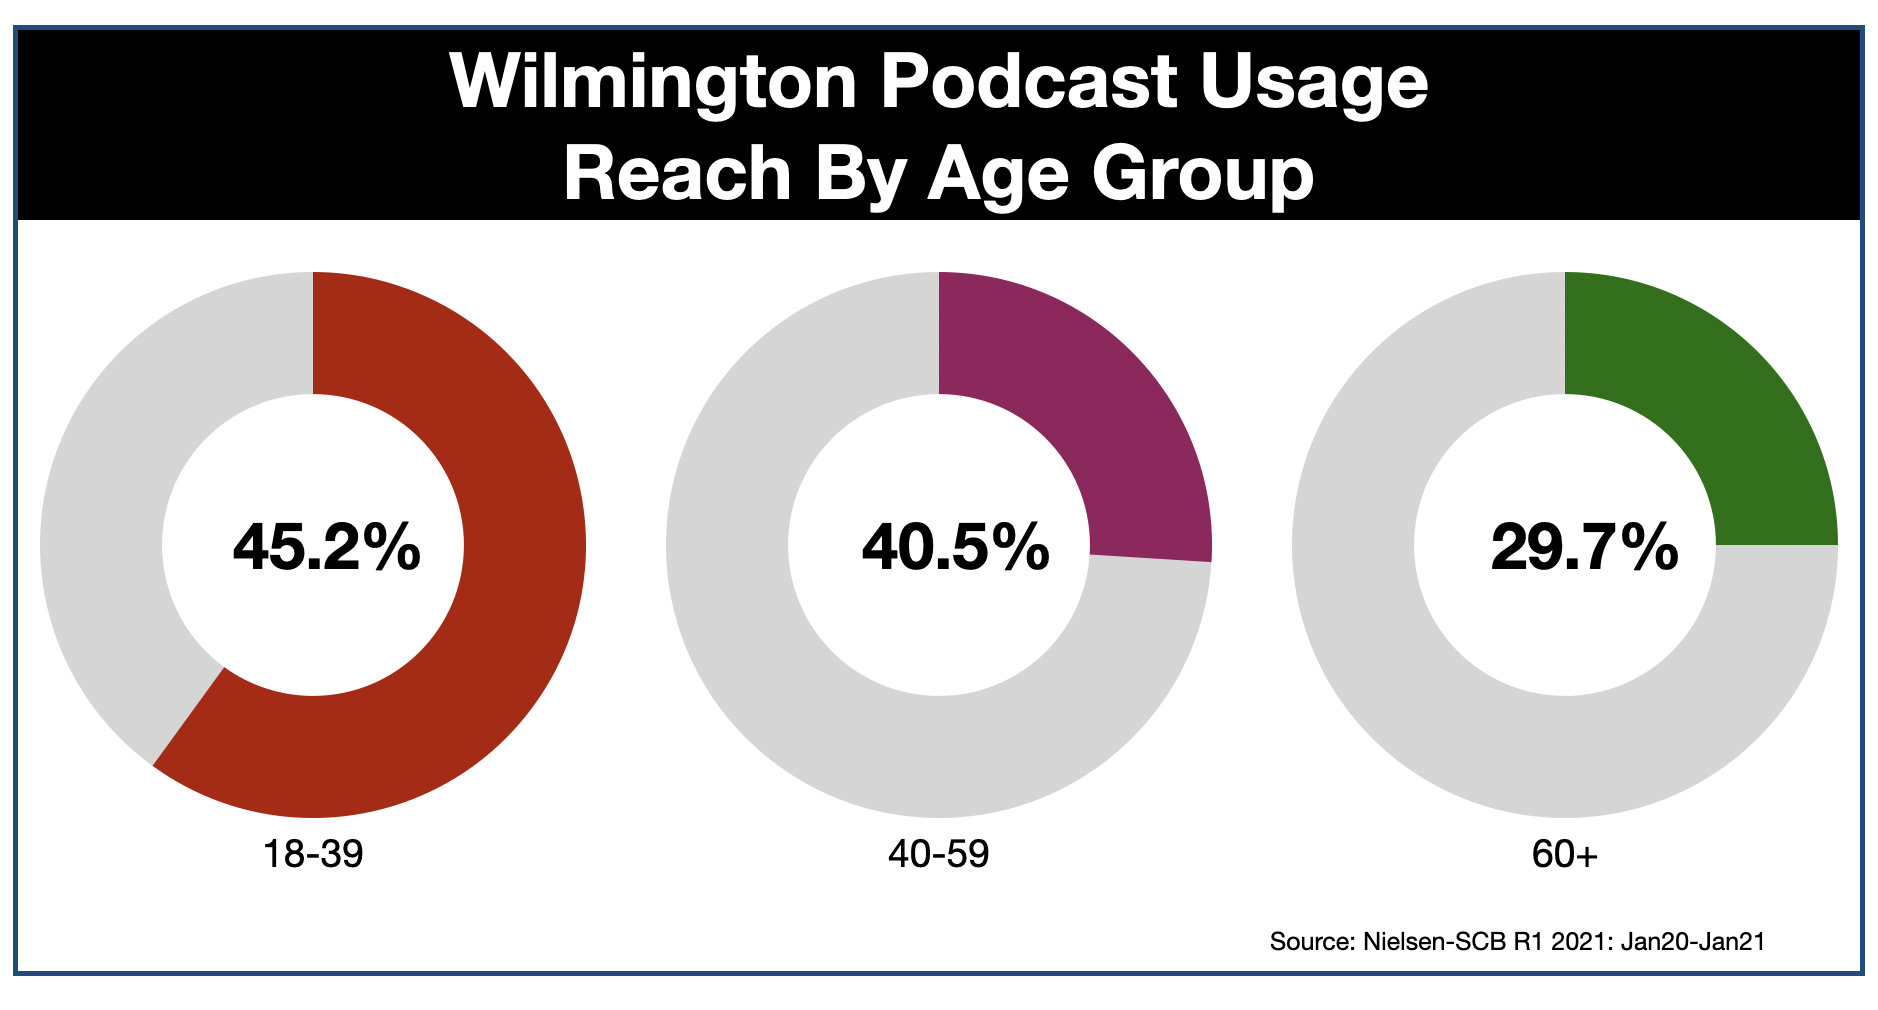 Podcast Advertising In Wilmington AGE